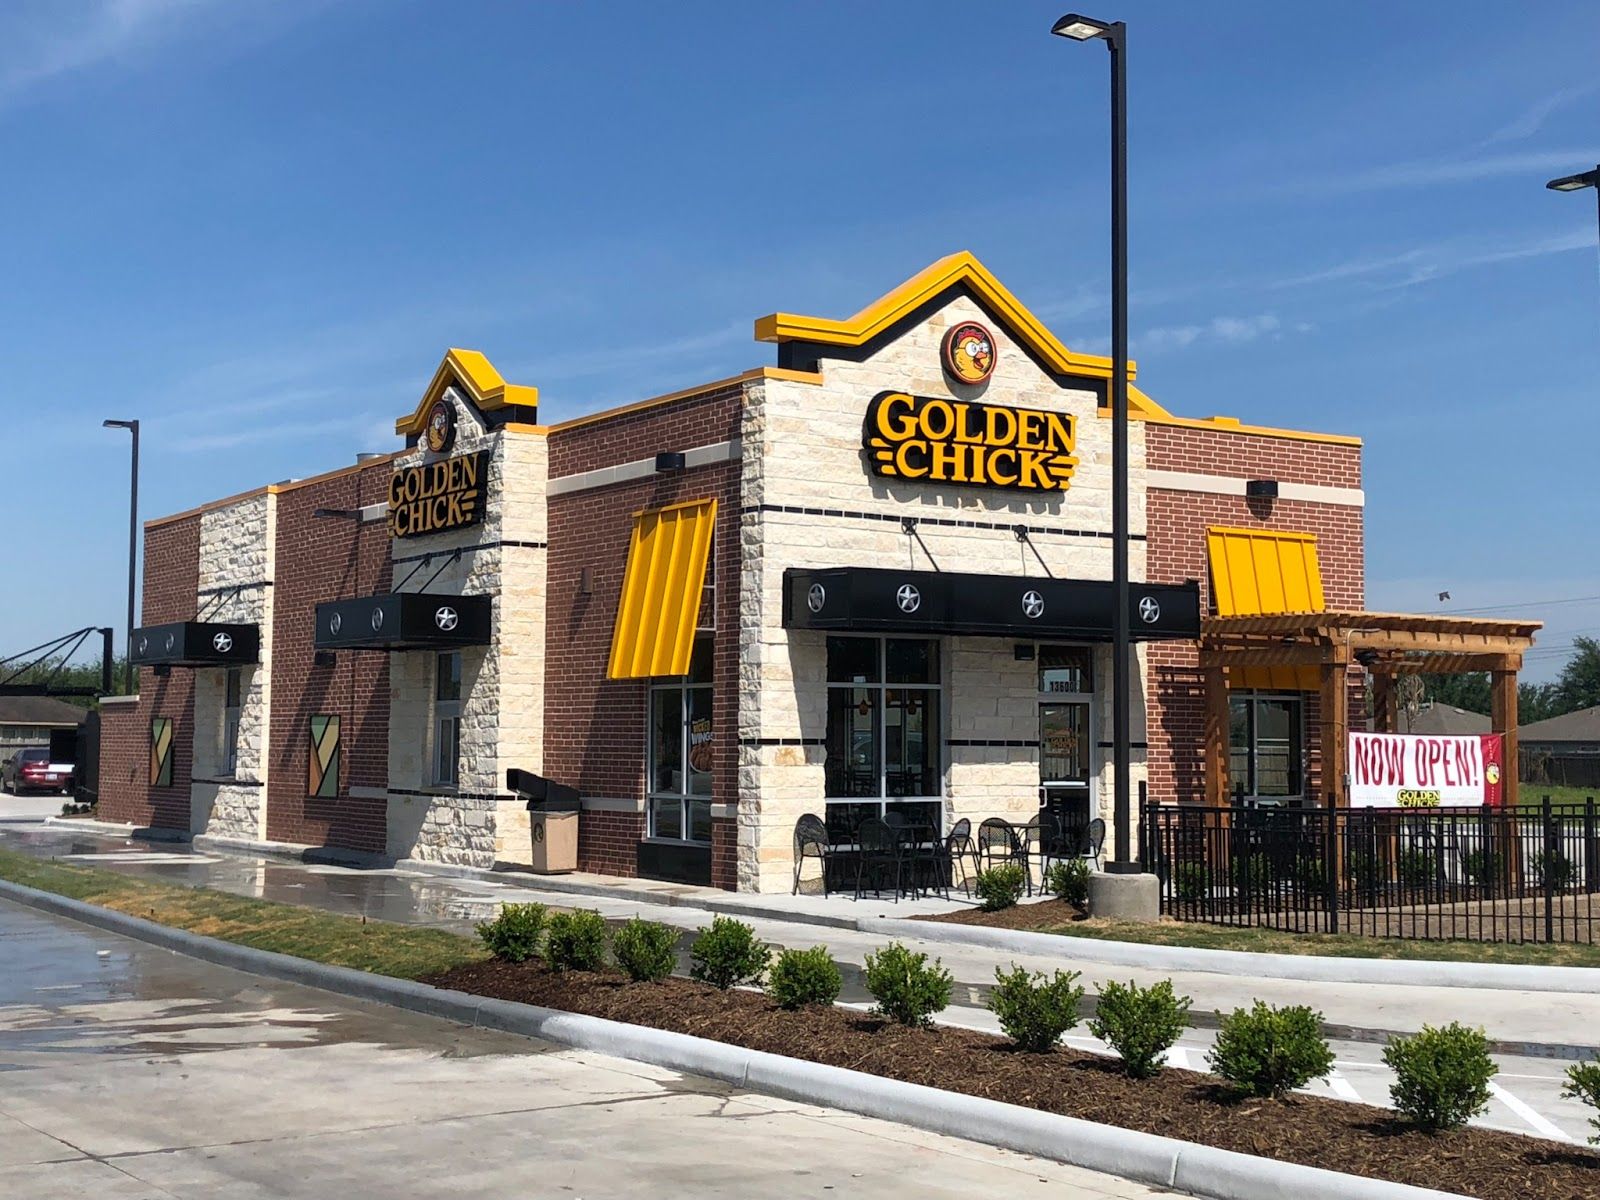 Golden Chick Celebrates Duos' Journey From Employee to Franchisee